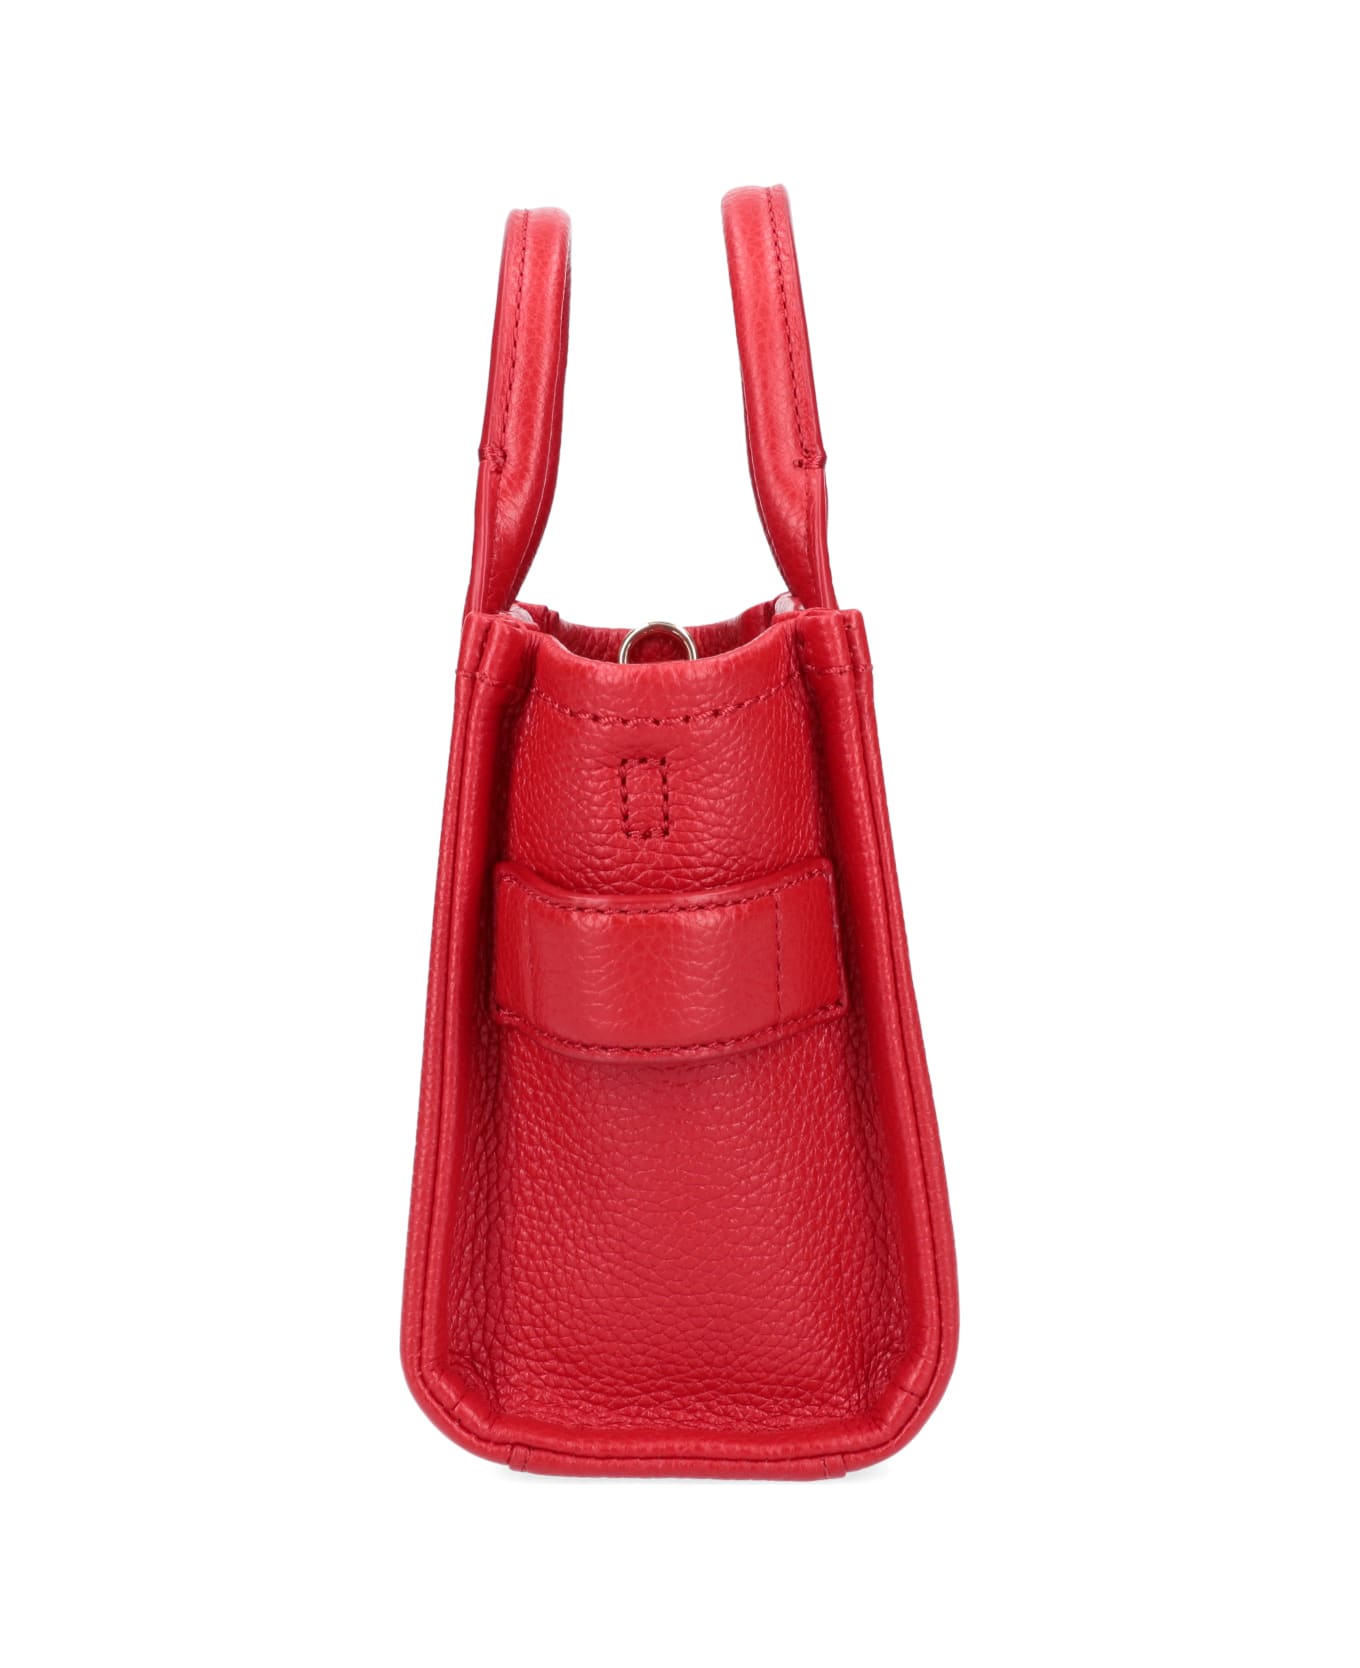 Marc Jacobs Micro Tote Leather Handbag - Red